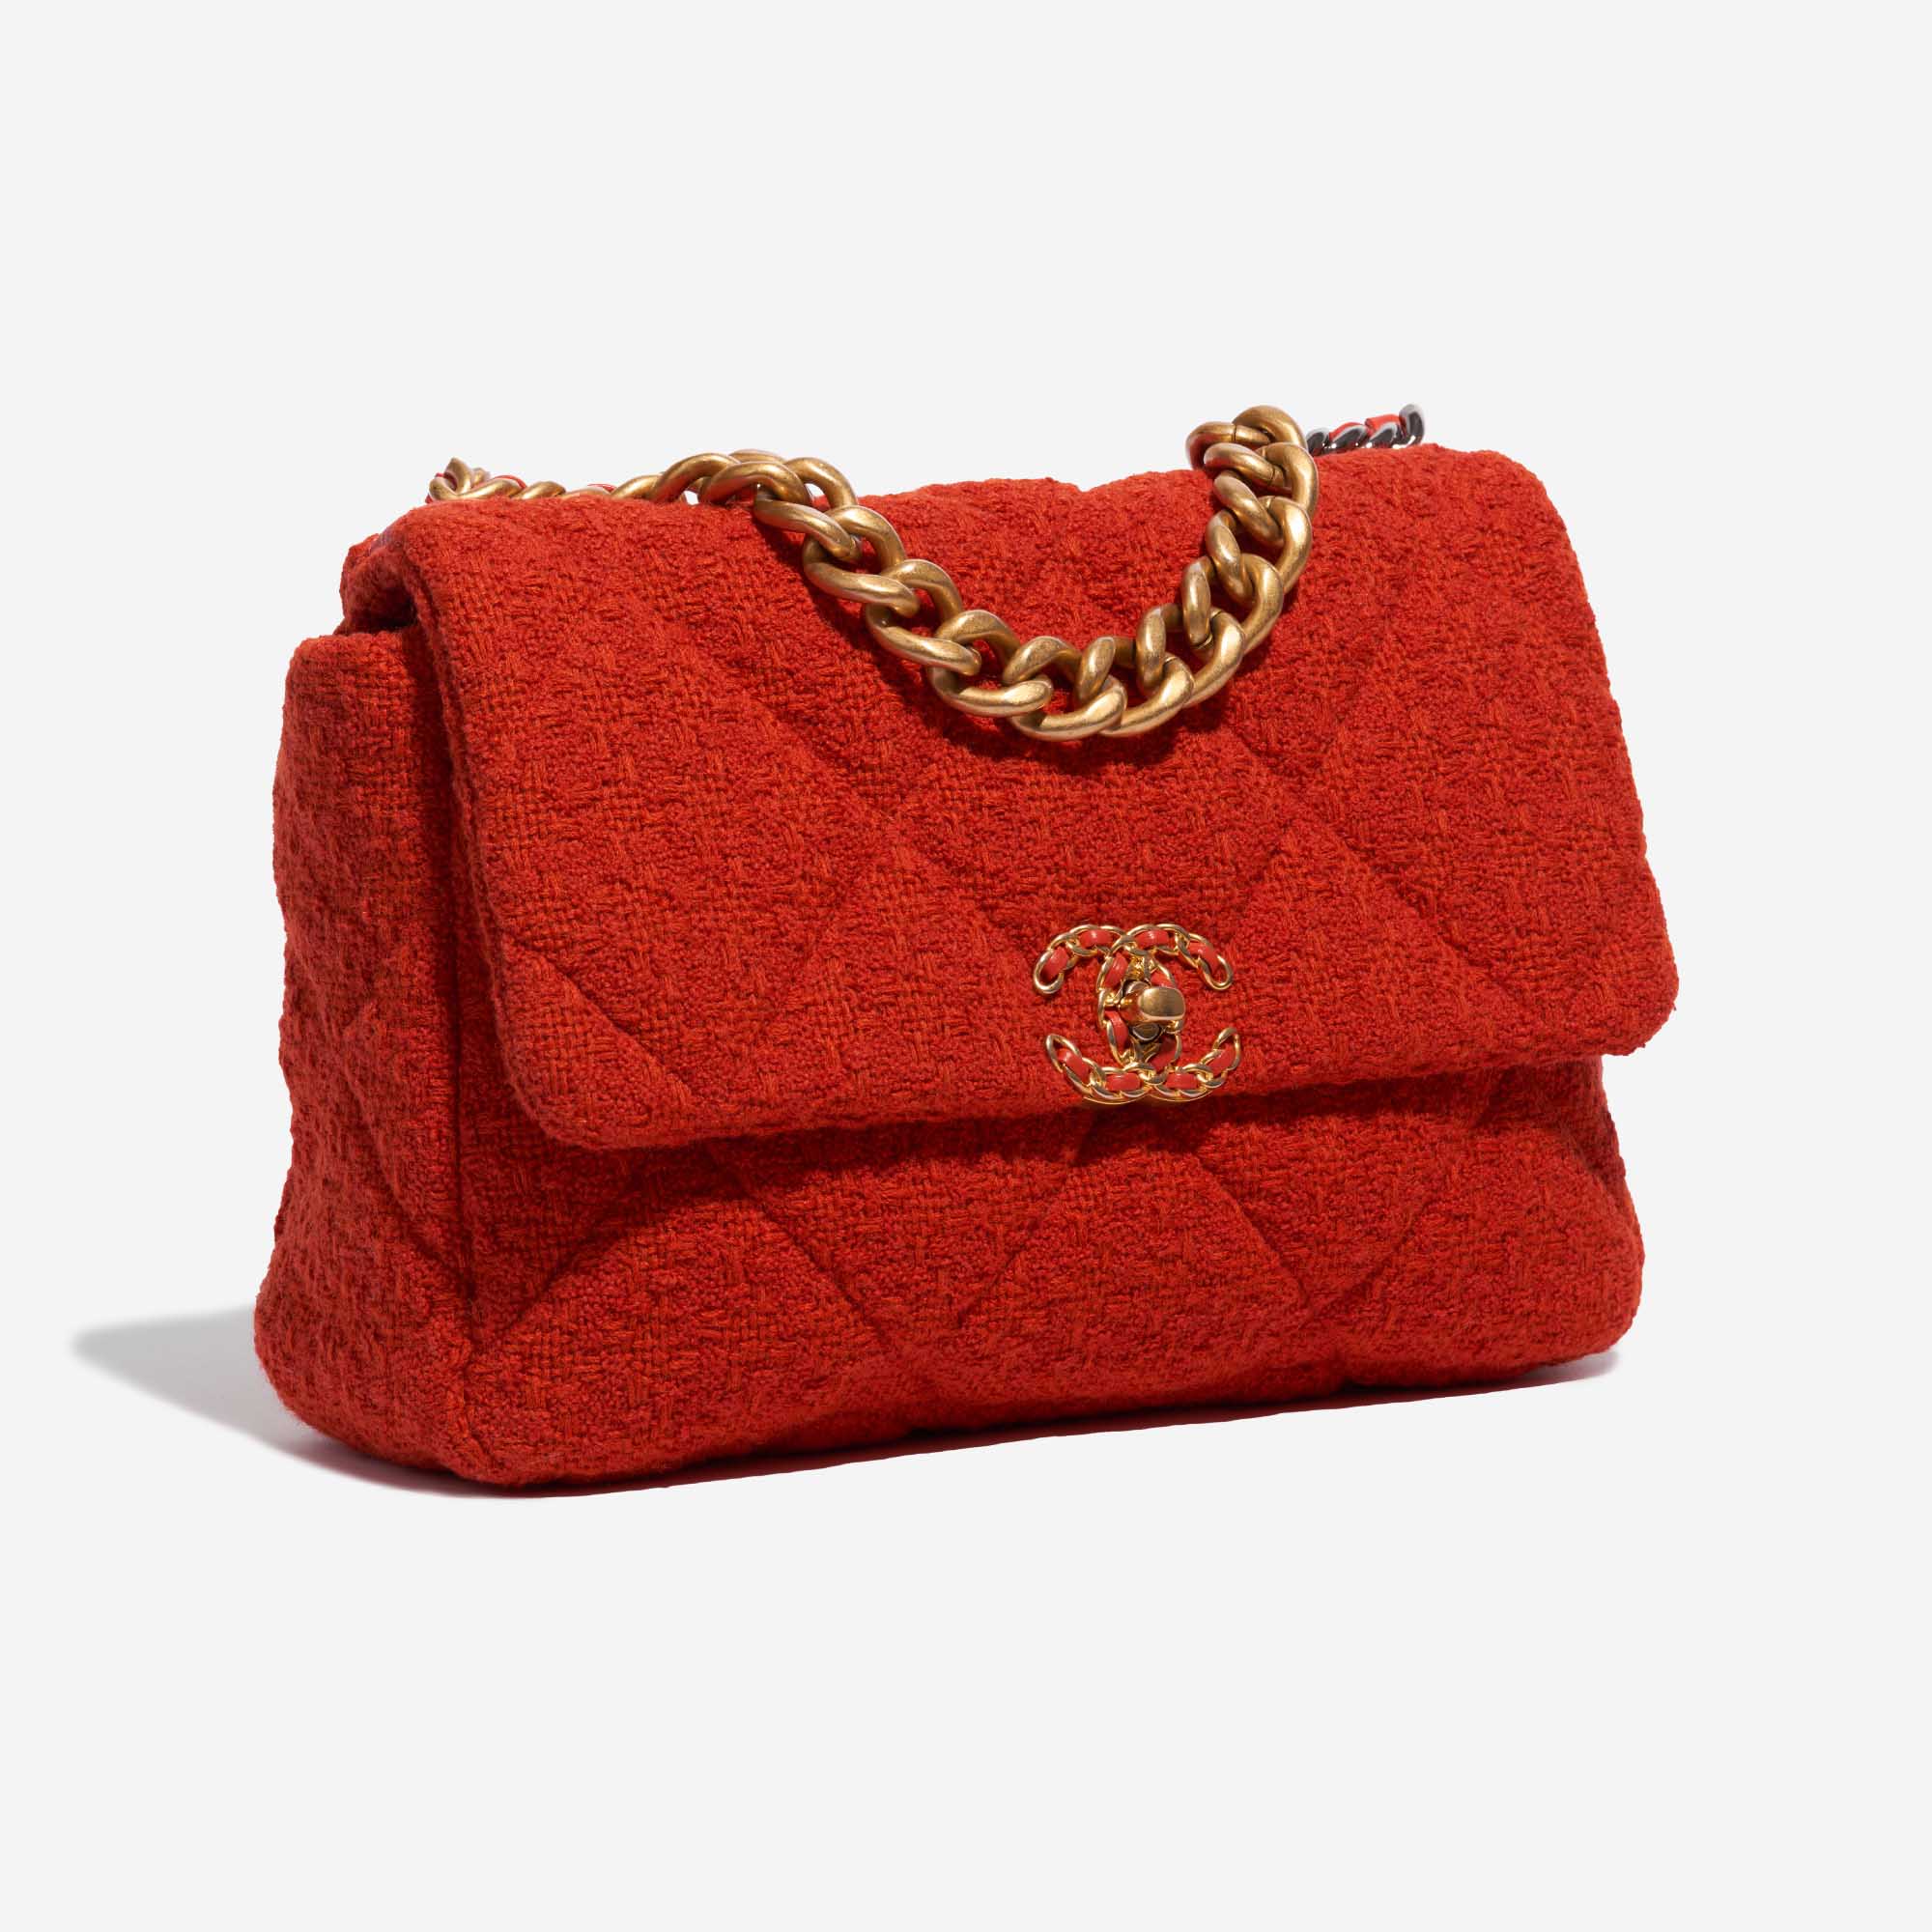 Pre-owned Chanel bag 19 Flap Bag Large Wool Red Red Side Front | Sell your designer bag on Saclab.com